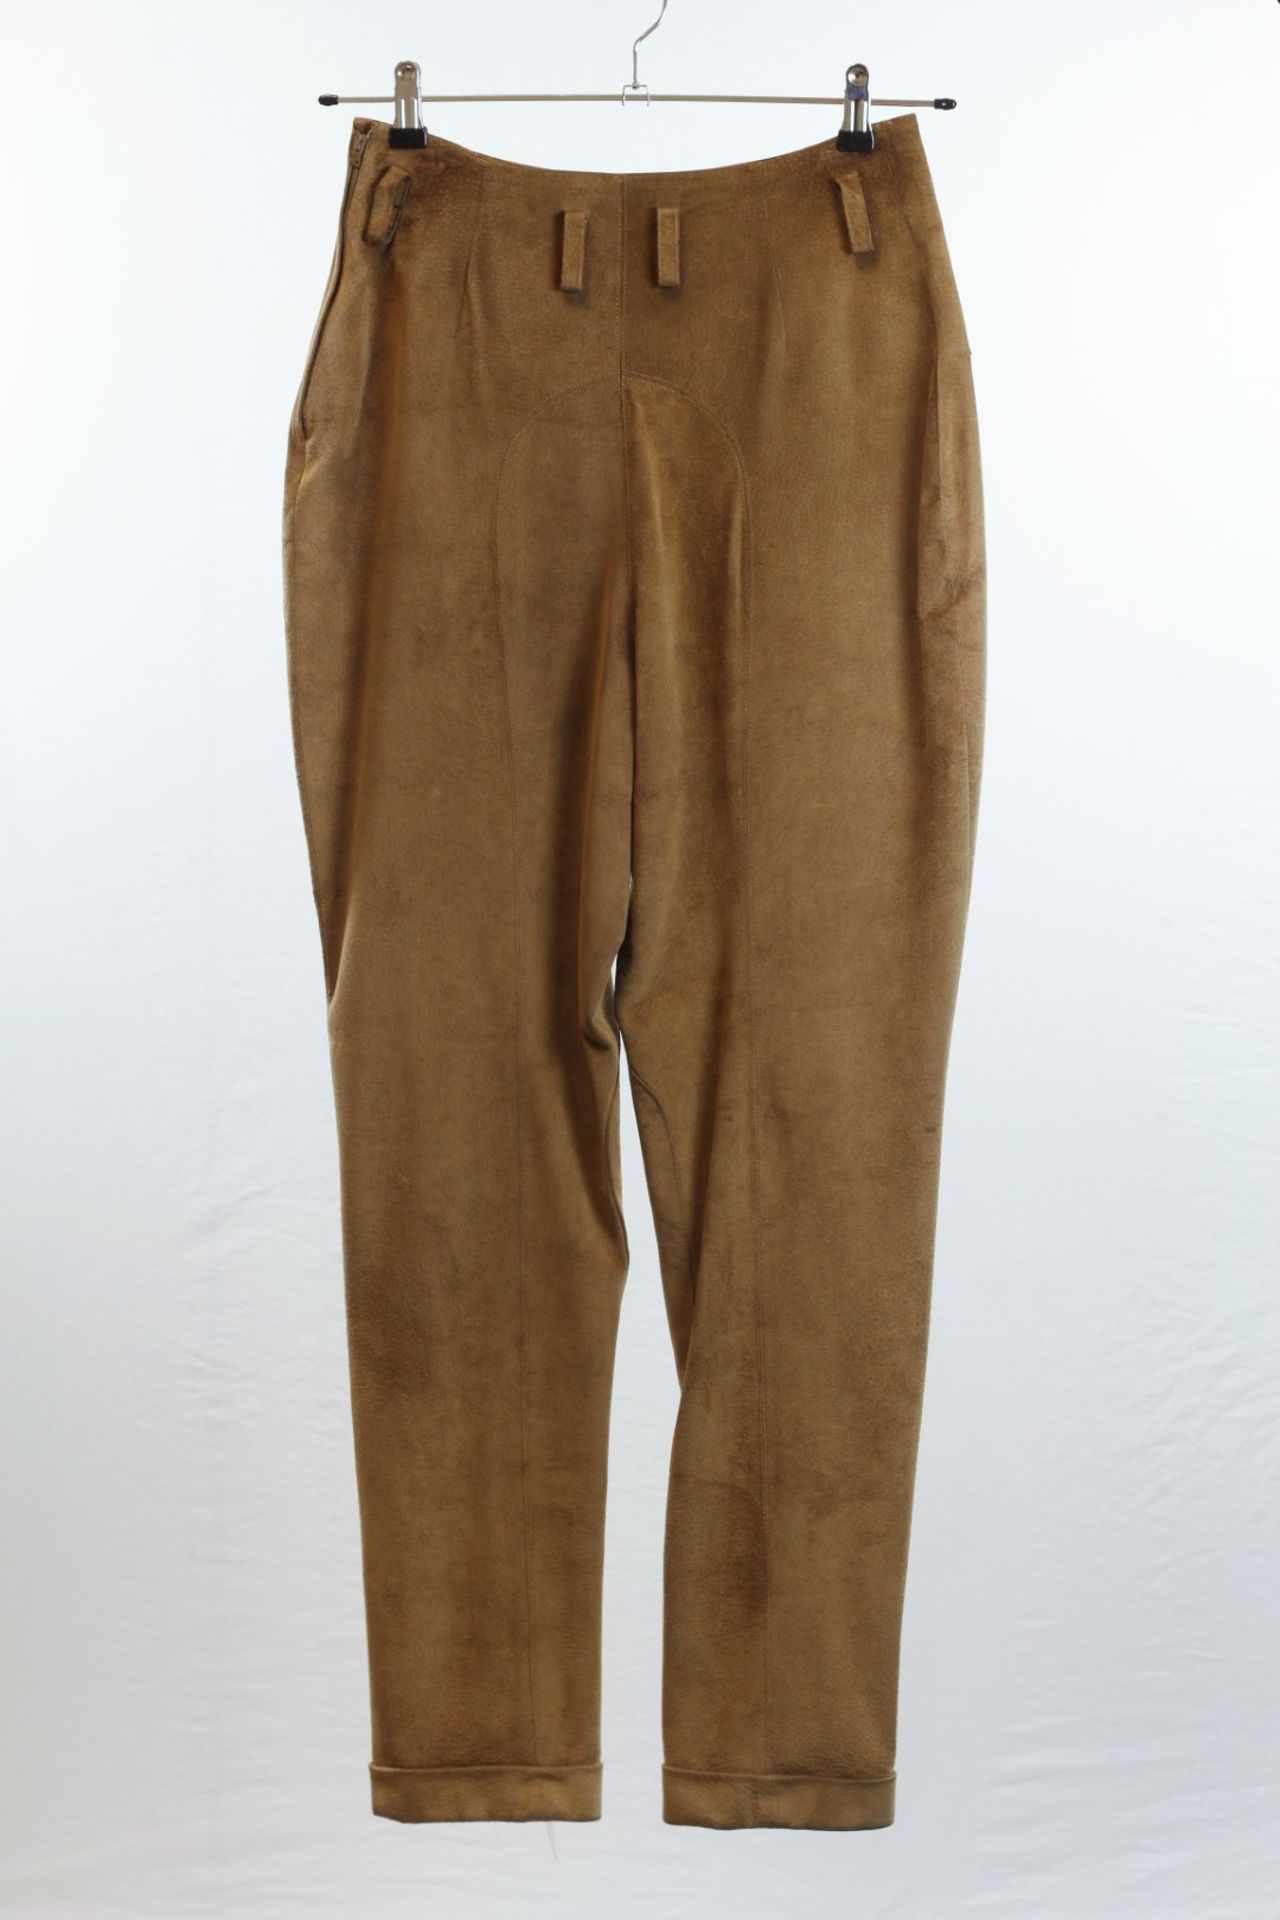 1 x Boutique Le Duc Fawn Brown Trousers - Size: 12 - Material: Natural Suede - From a High End